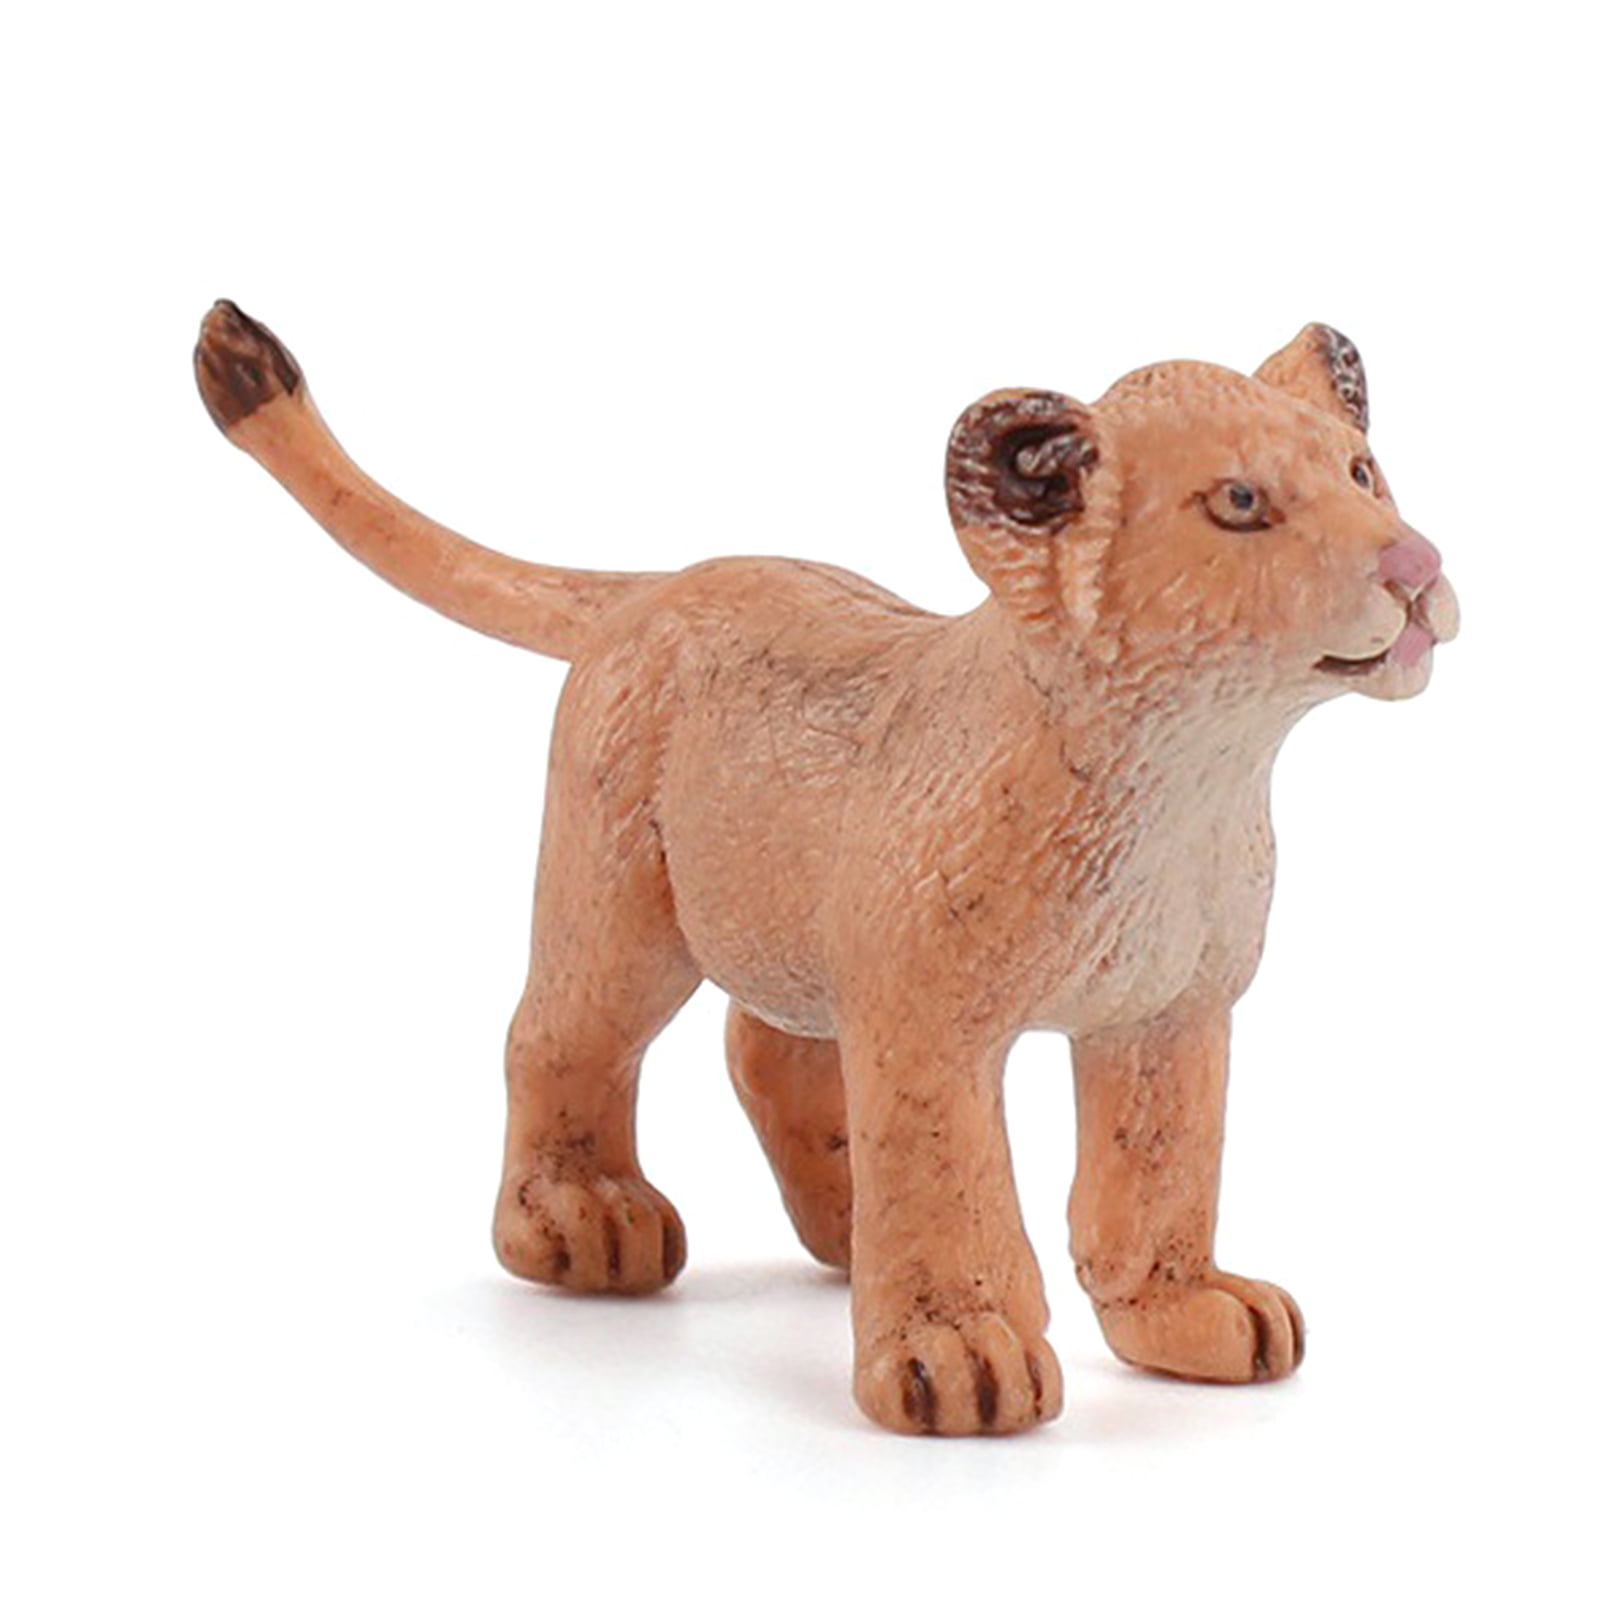 Wild Zoo Animal Tiger Model Figure Figurine Kids Toy Home Decor Collections 